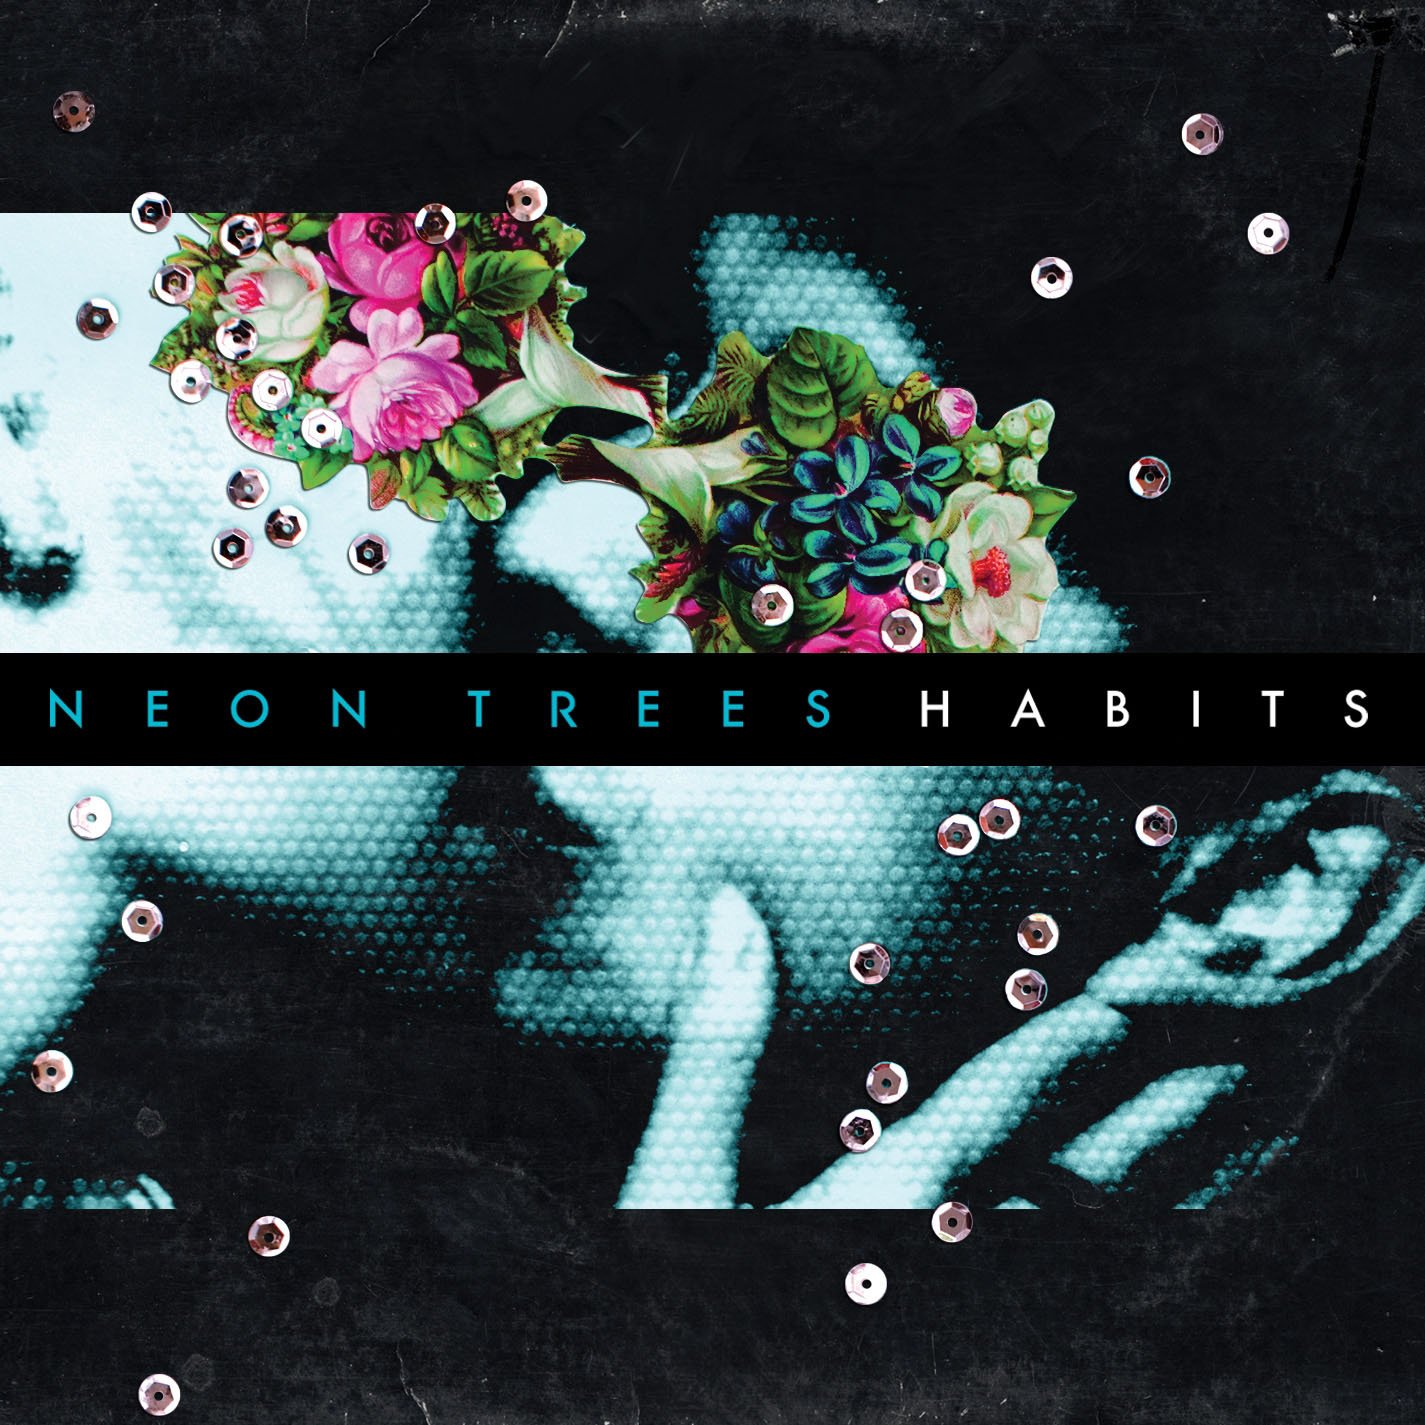 From The Record Crate Neon Trees Habits 2010 The Young Folks